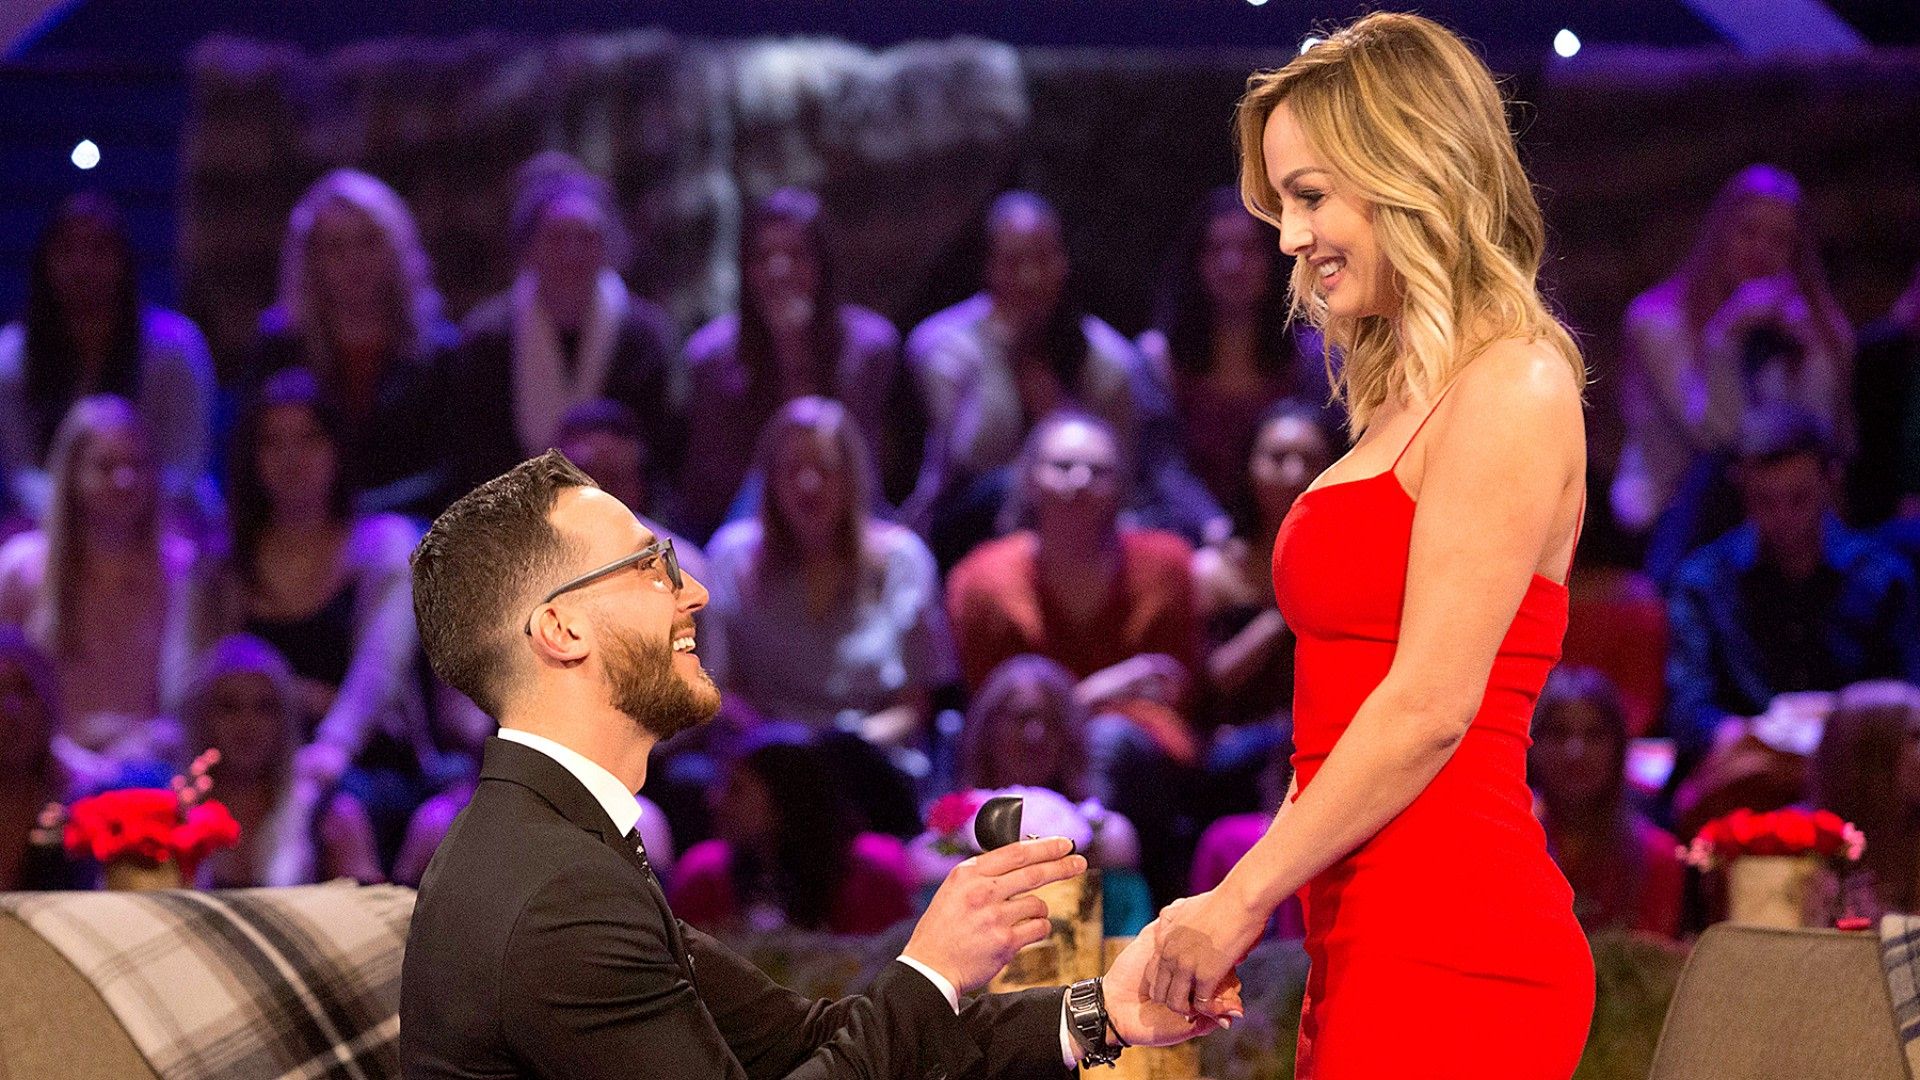 Bachelor Winter Games Gave Us the Best Bachelor Engagement of All